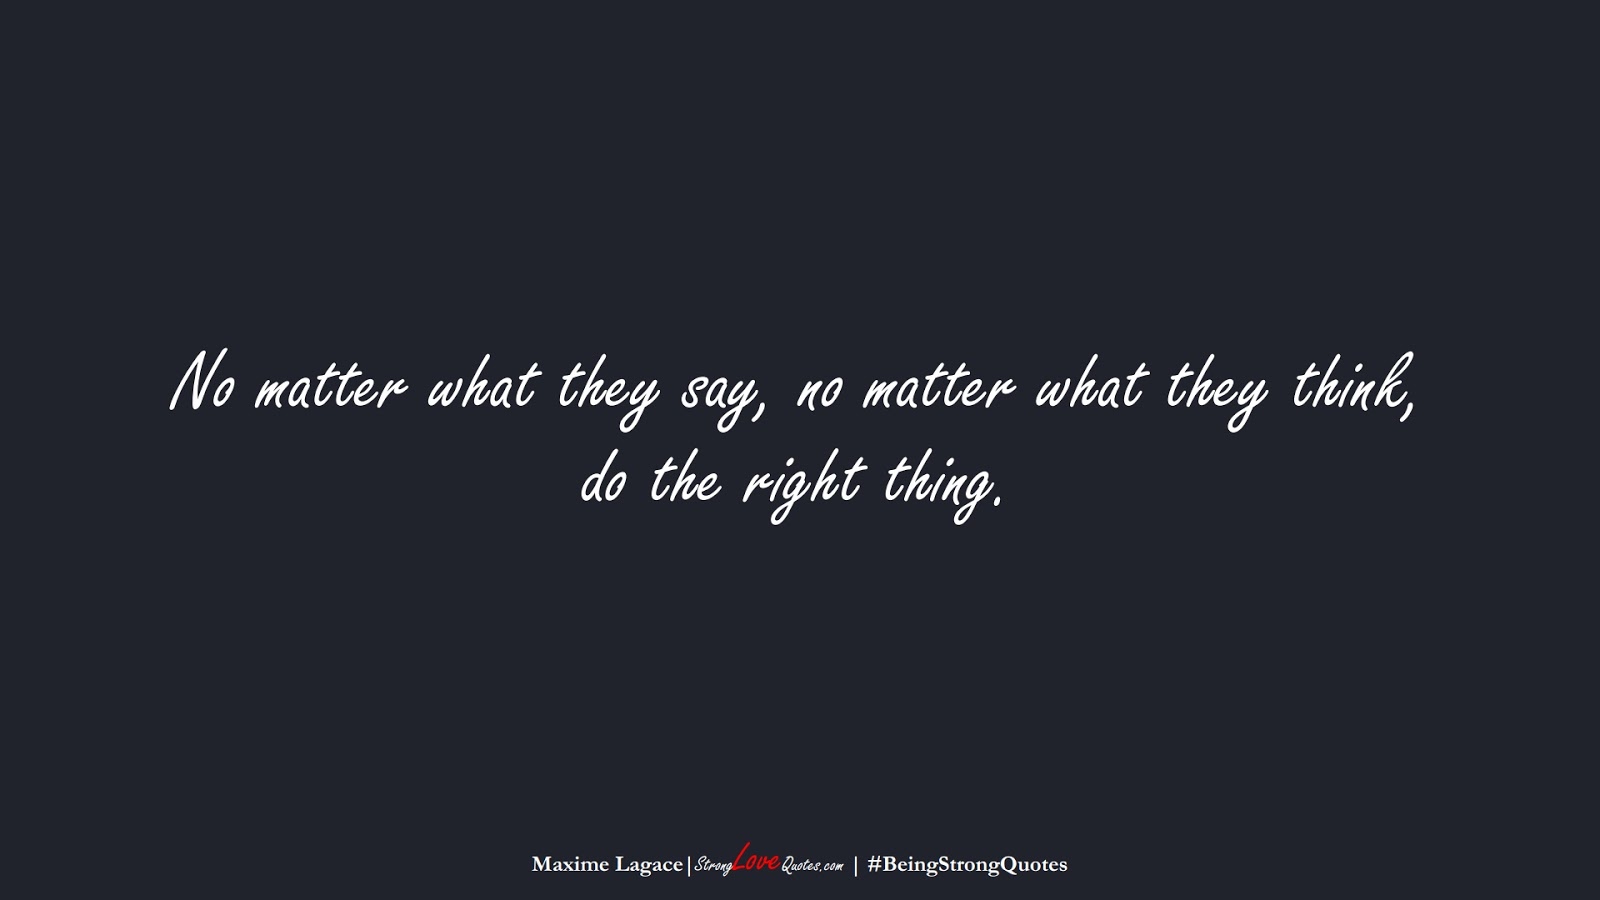 No matter what they say, no matter what they think, do the right thing. (Maxime Lagace);  #BeingStrongQuotes